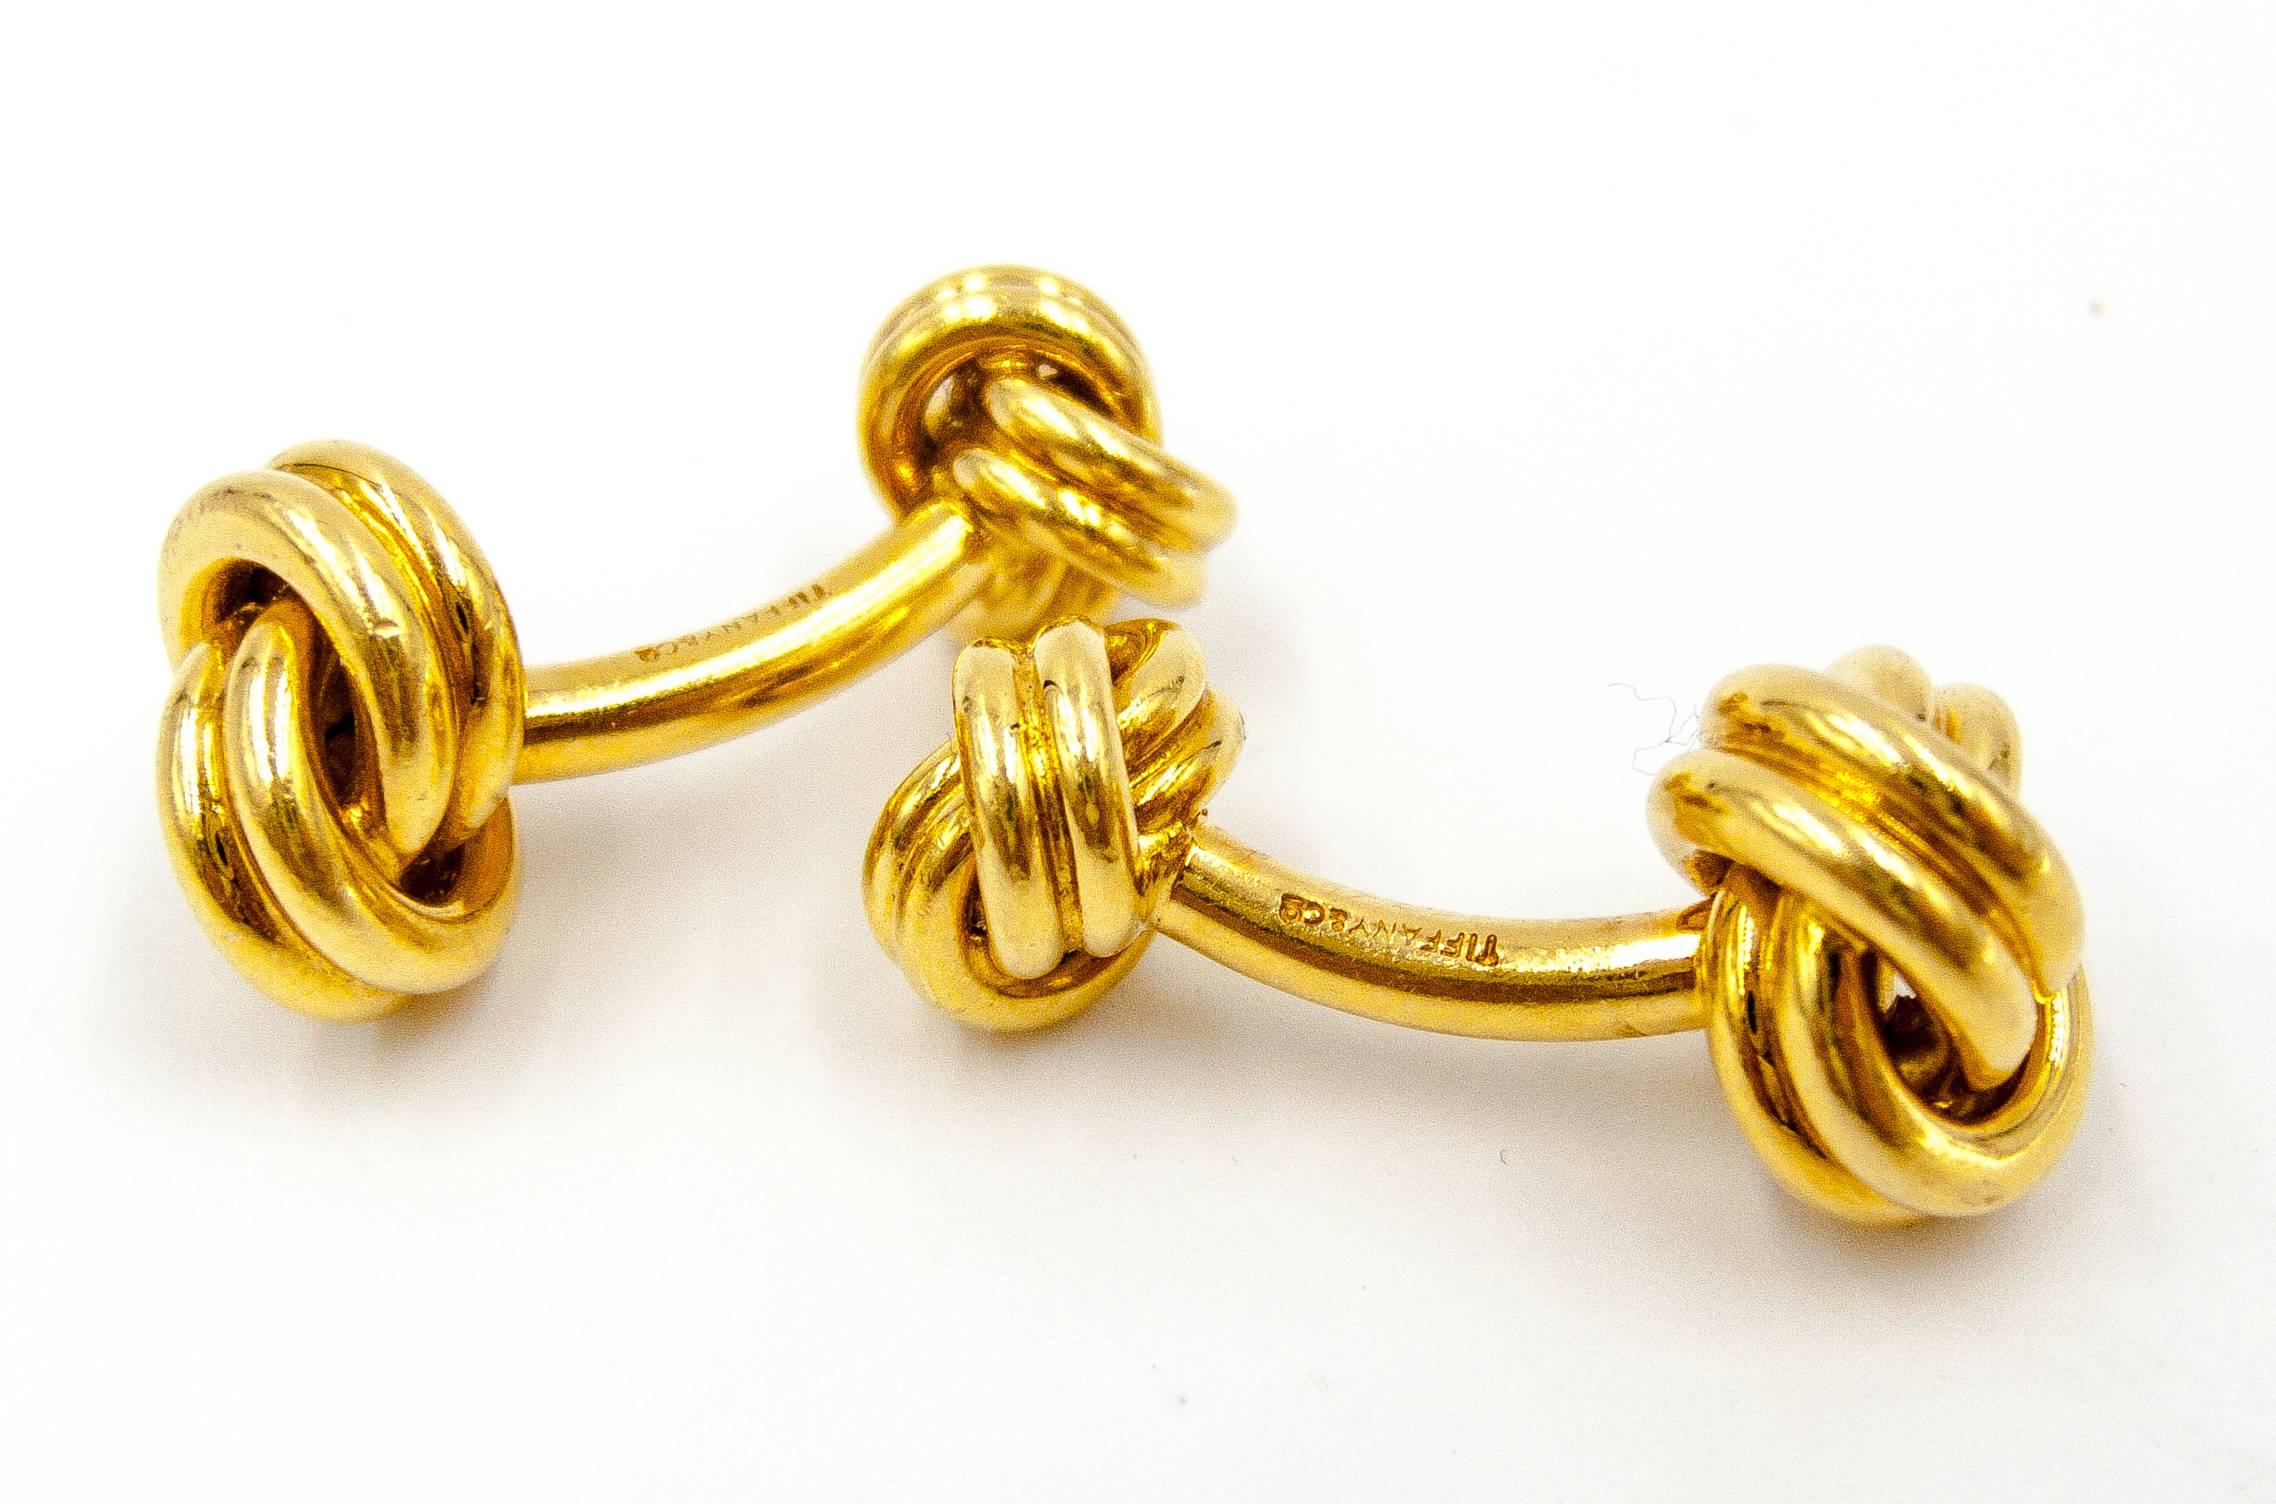 This classic Tiffany design has stood the test of time and will do so for decades to come.  The perfectly balanced knots are tethered by a curved tube of 18 karat gold to accommodate the buttonholes., The gold has a rich, soft sheen and the